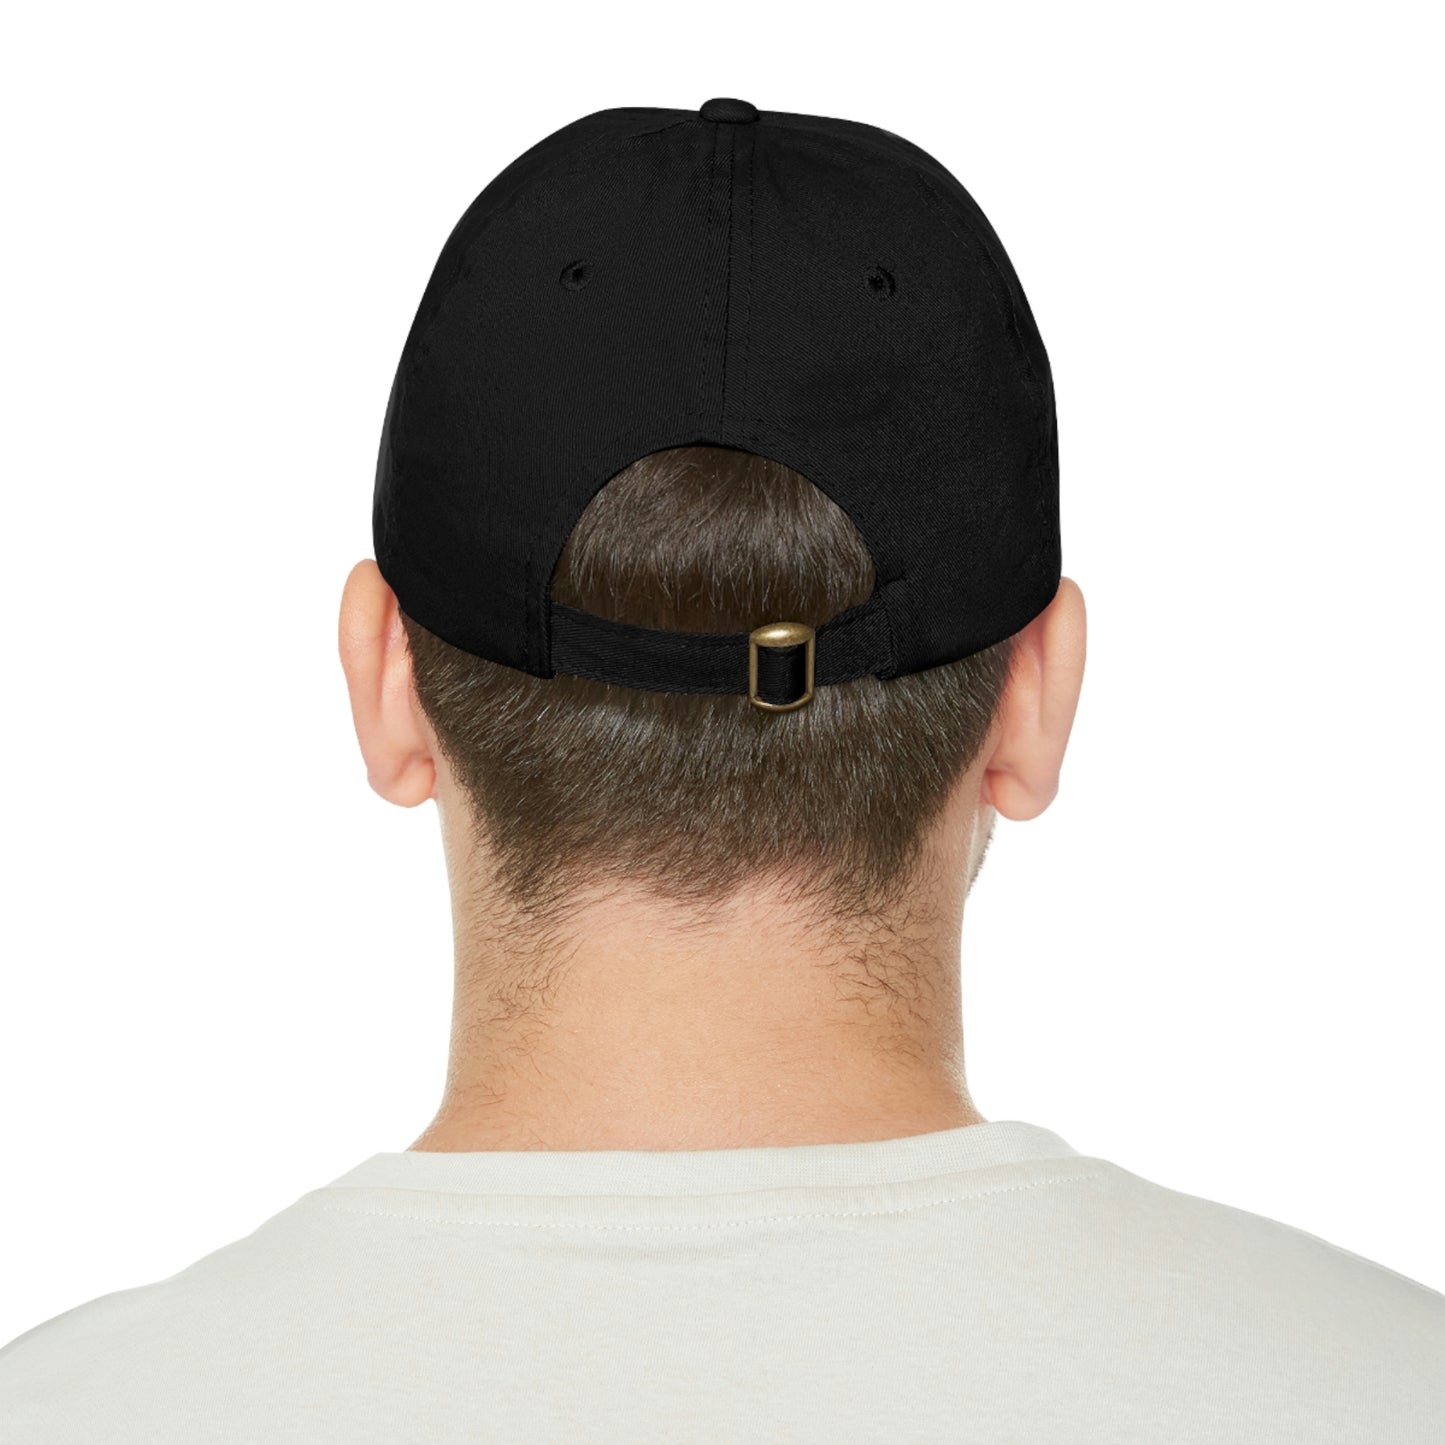 Interstellar Black Space Dad Hat with Leather Patch